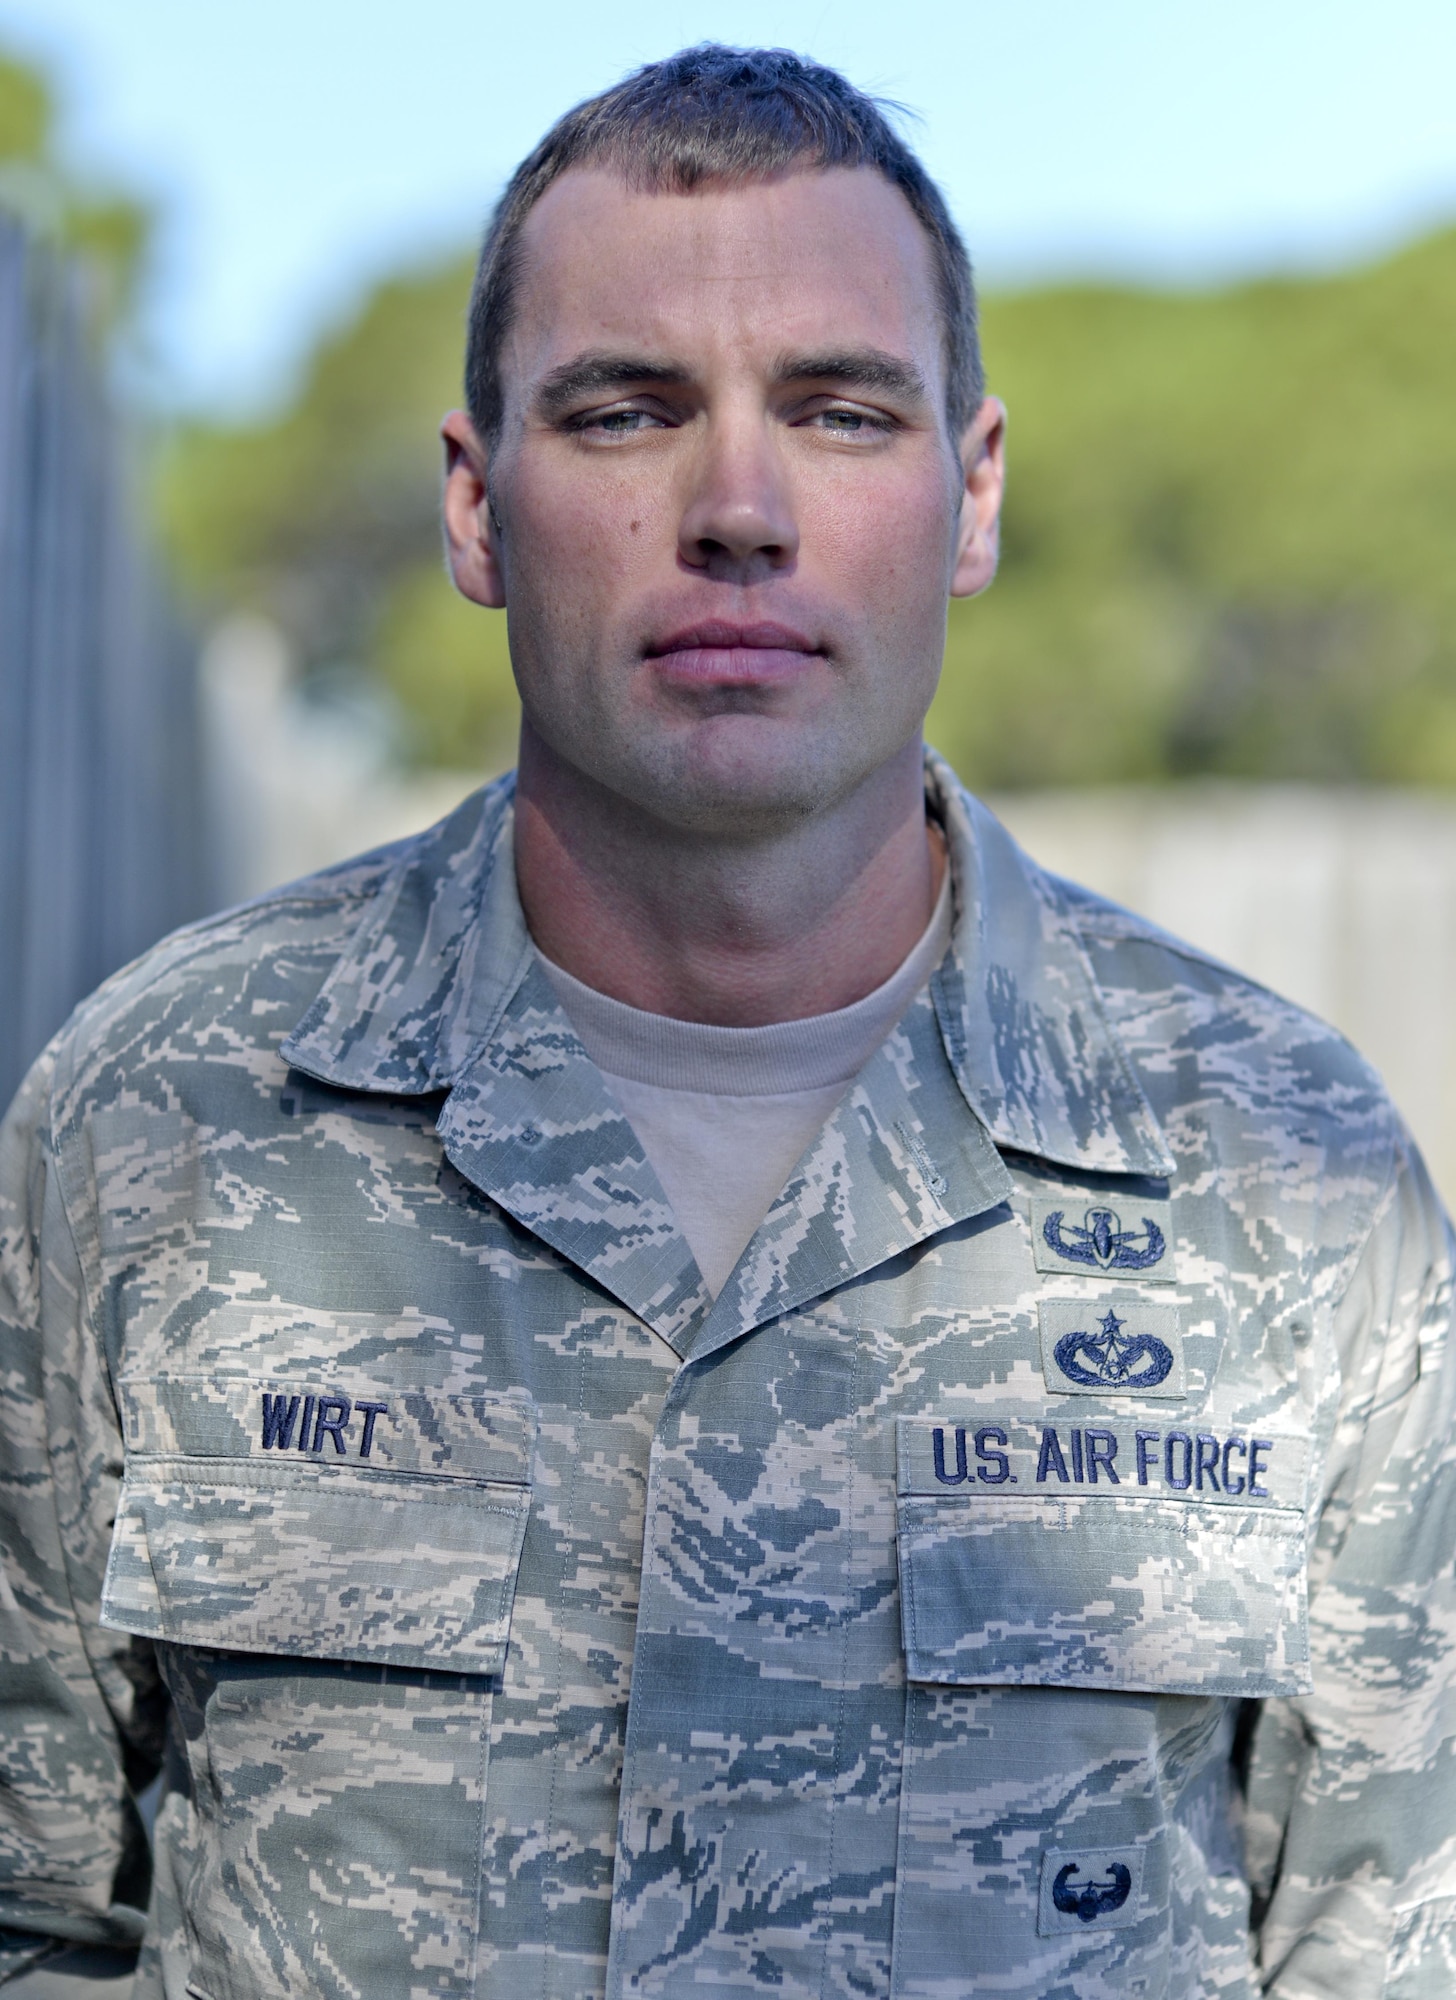 U.S. Air Force Tech. Sgt. Brian Wirt, 325th Civil Engineer Squadron explosive ordinance disposal team lead, recently earned the distinguished graduate award while attending the Sabalauski Air Assault School at Fort Campbell, Kentucky, July 2016. The school is hosted by the 101st Airborne Division, also known as the “Screaming Eagles,” and consists of three primary areas of instruction: combat assault operations, sling loading (helicopter cargo transportation) and rappelling. (U.S. Air Force photo by Tech. Sgt. Javier Cruz/Released)